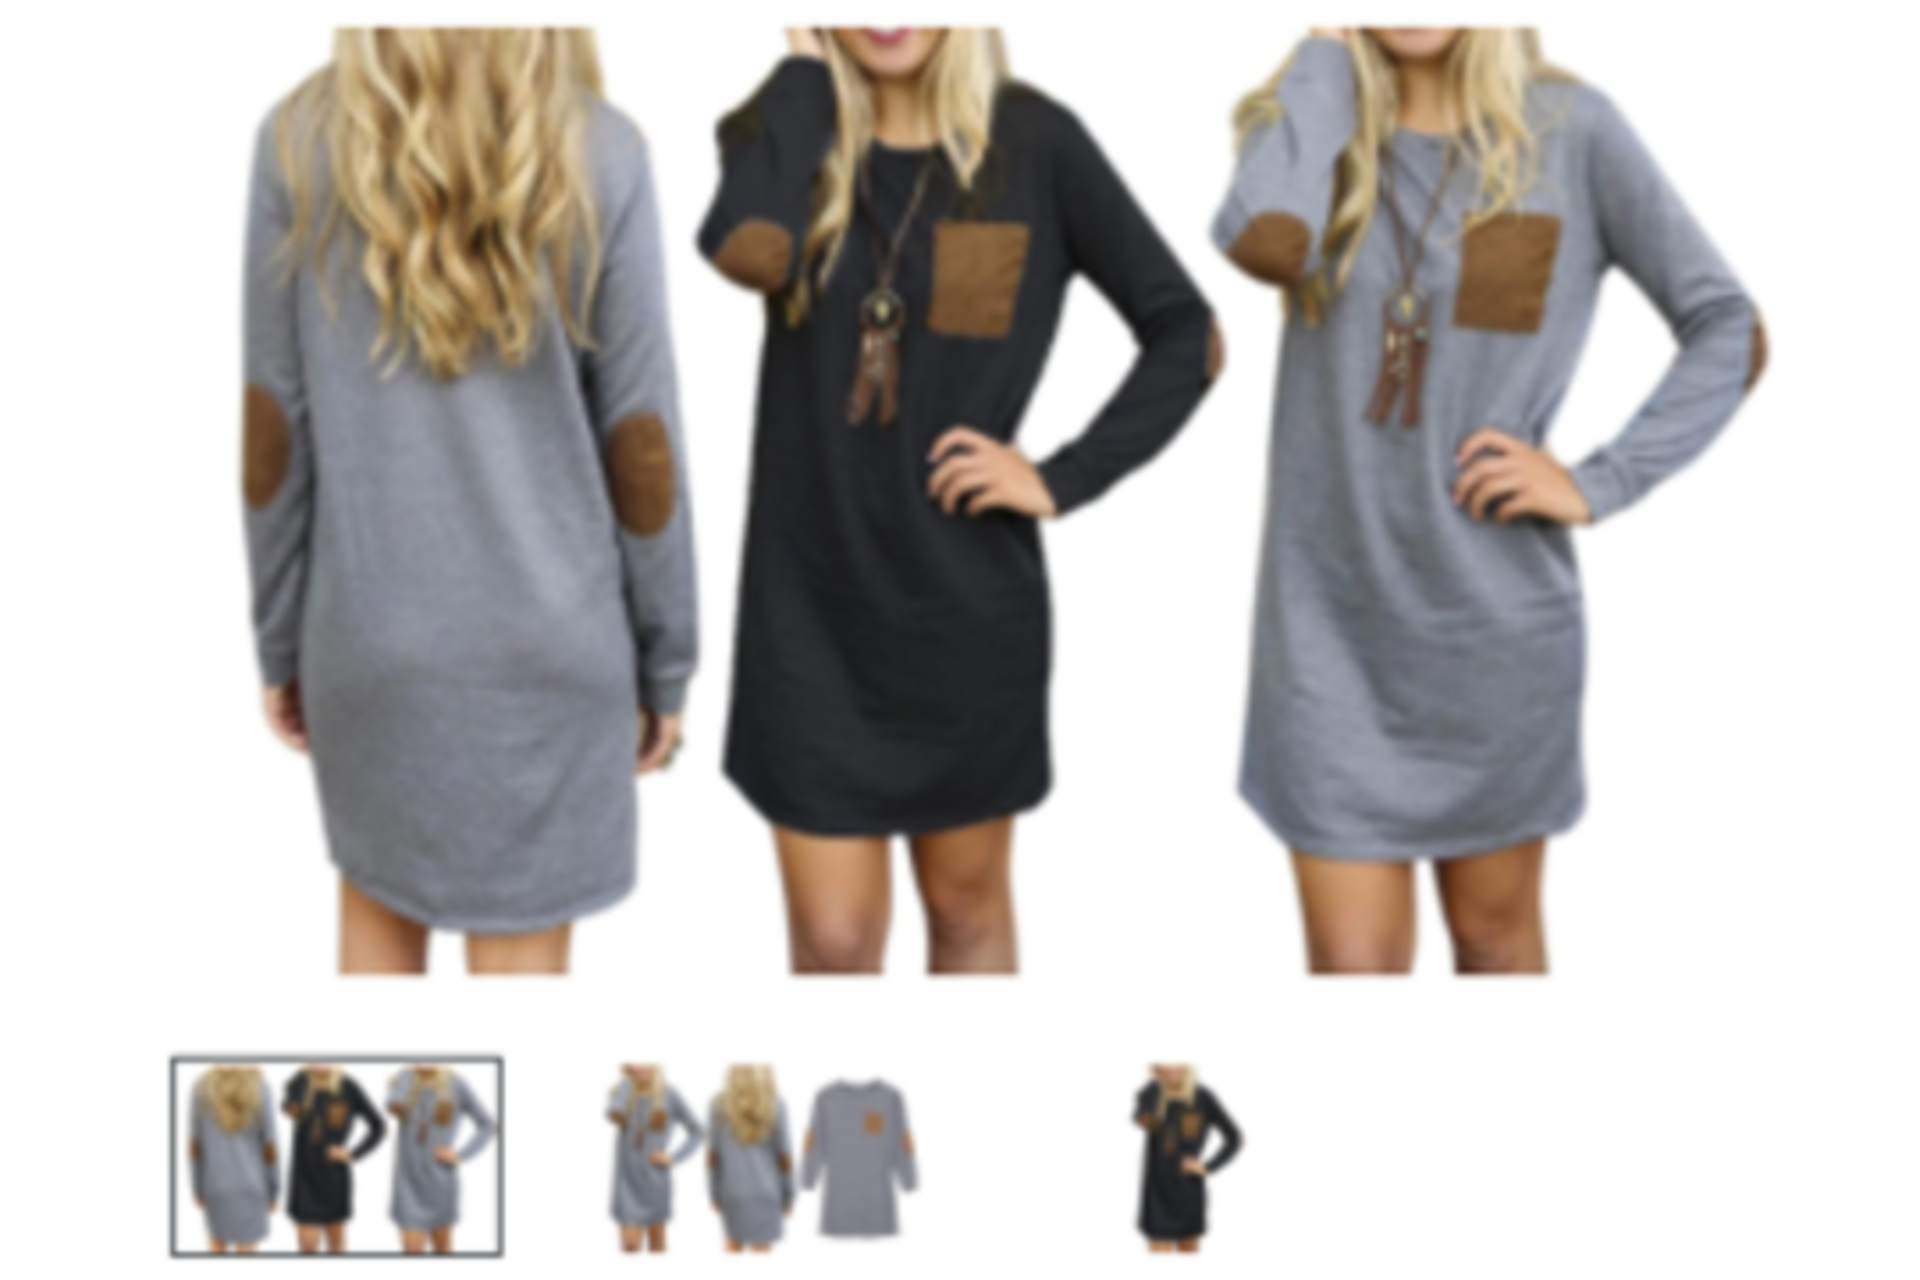 PALLET TO CONTAIN 50 PIECES OF BRAND NEW MY DRESS BOUTIQUE CLOTHING INCLUDING DRESSES, TOPS,